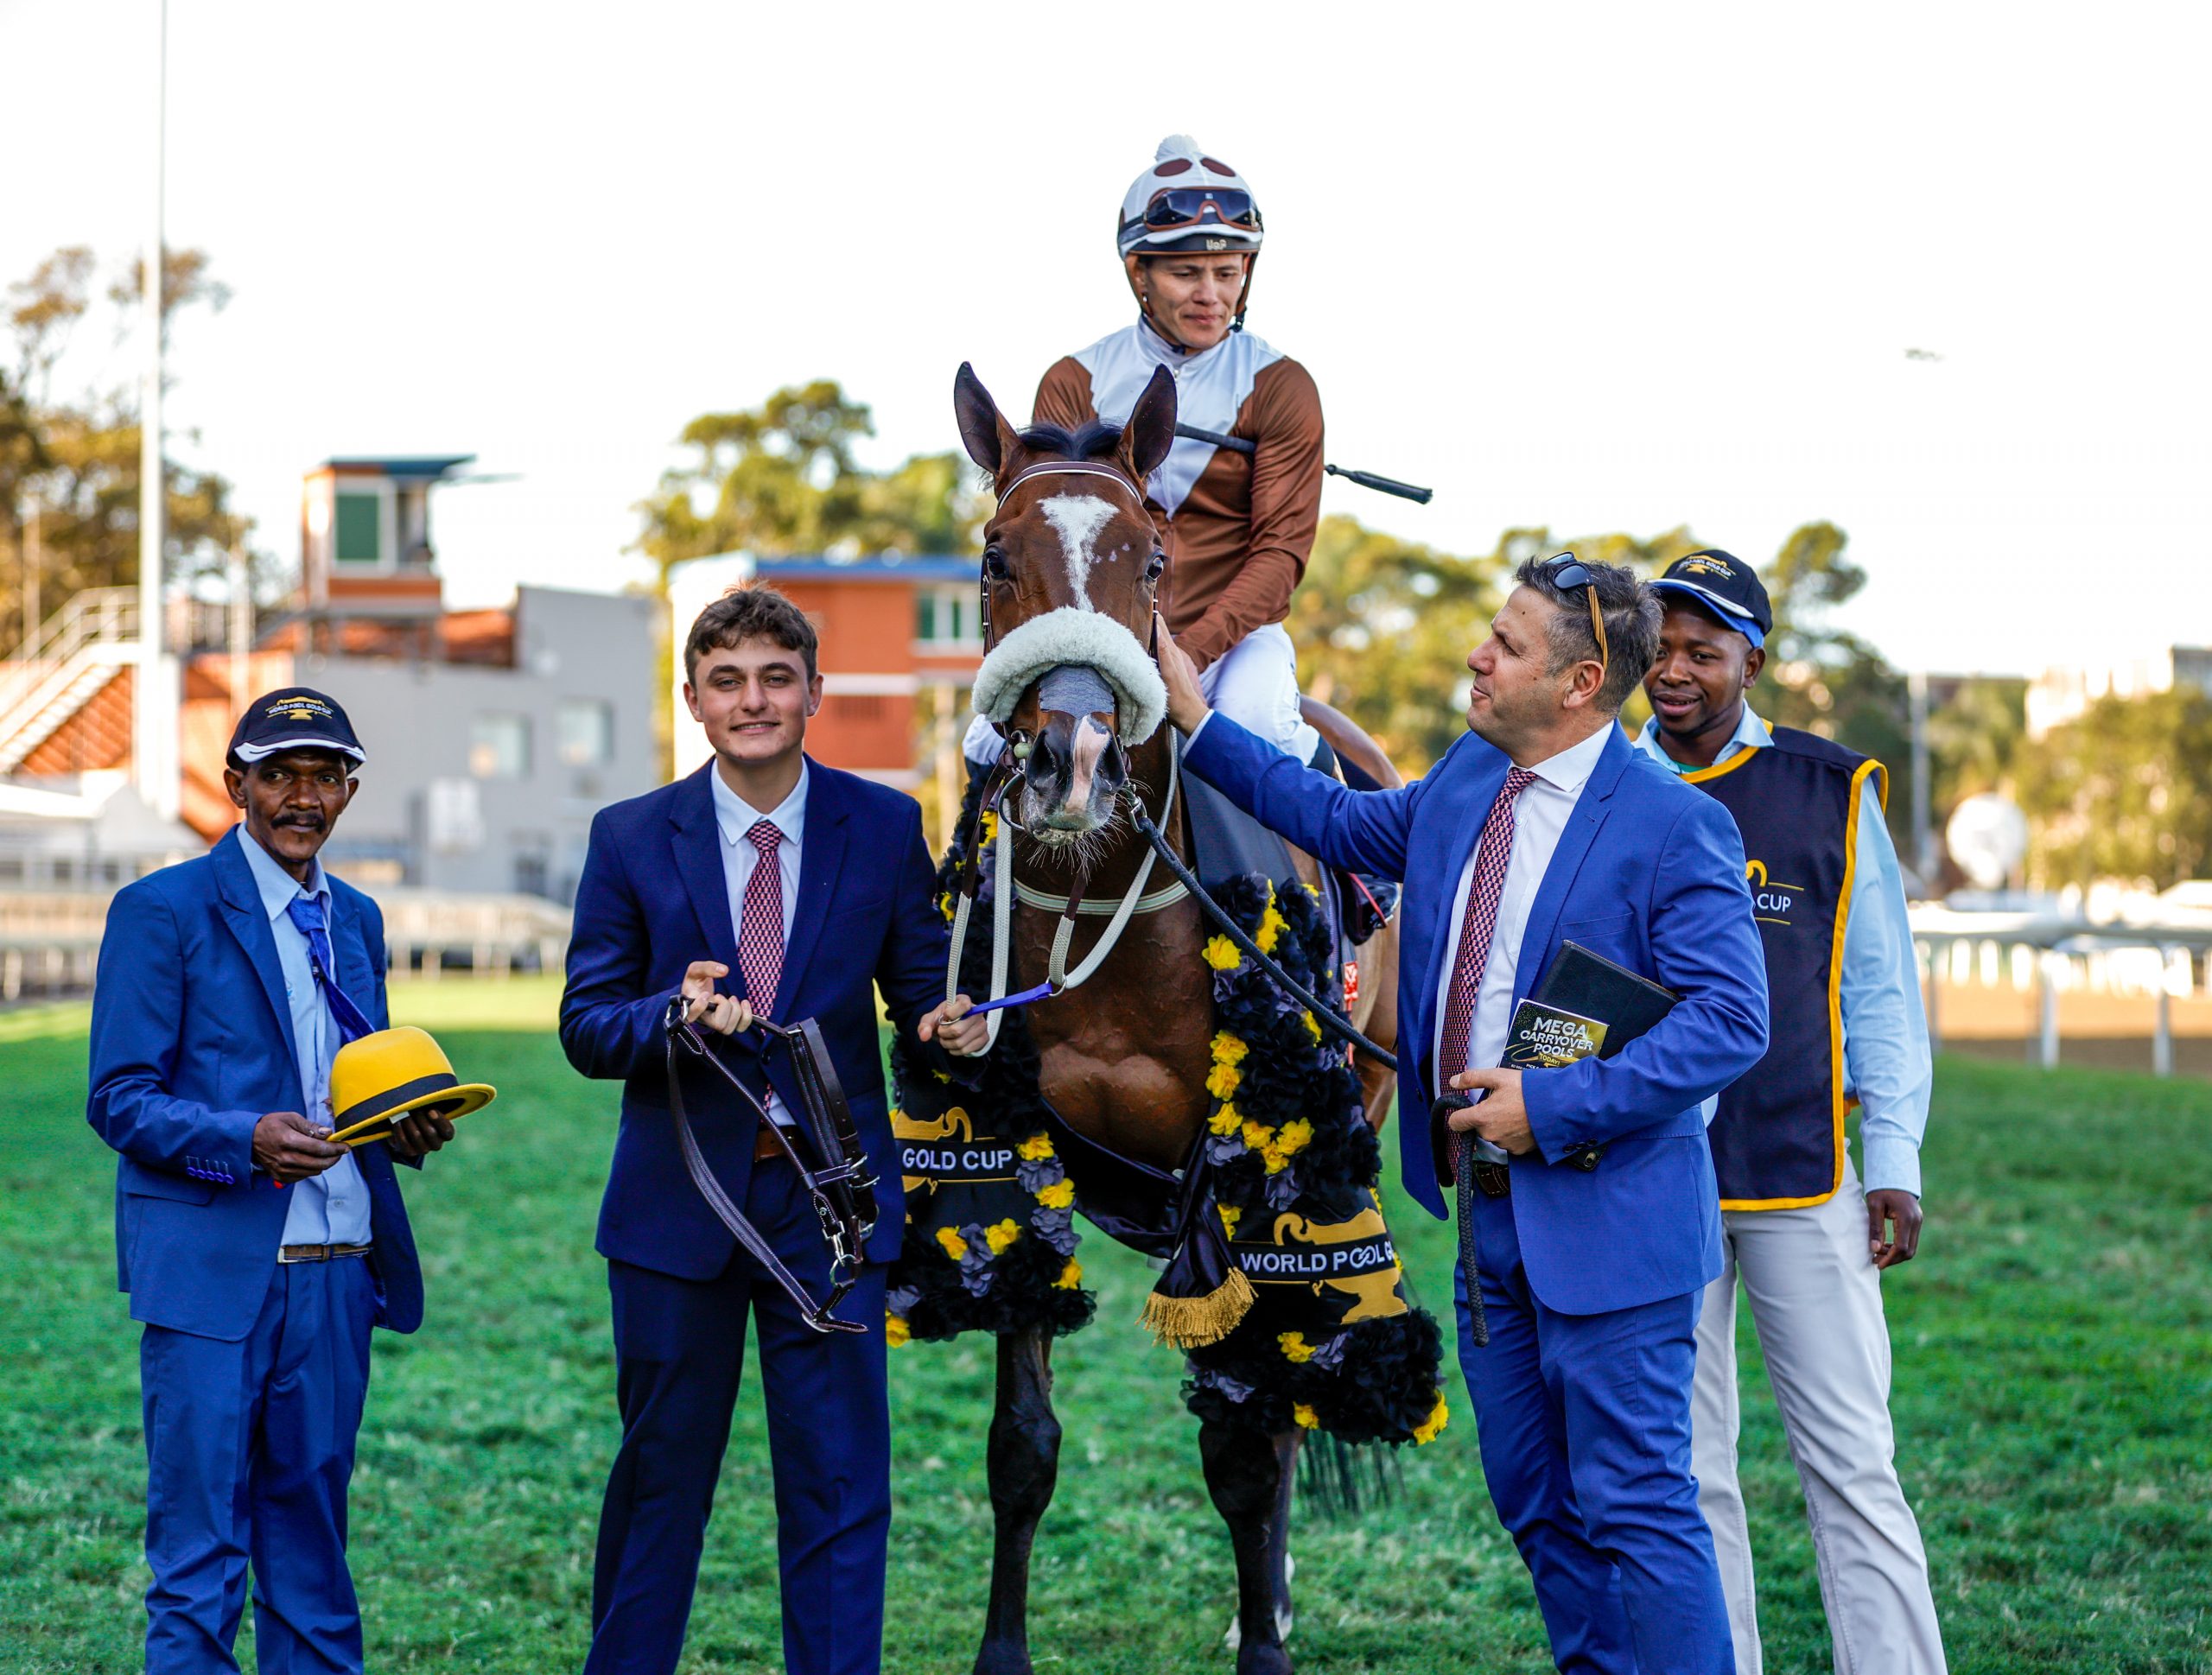 Sean and Daniel Tarry and the Randjesfontein team lead Future Pearl (Richard Fourie) in after his Gold Cup victory last year 